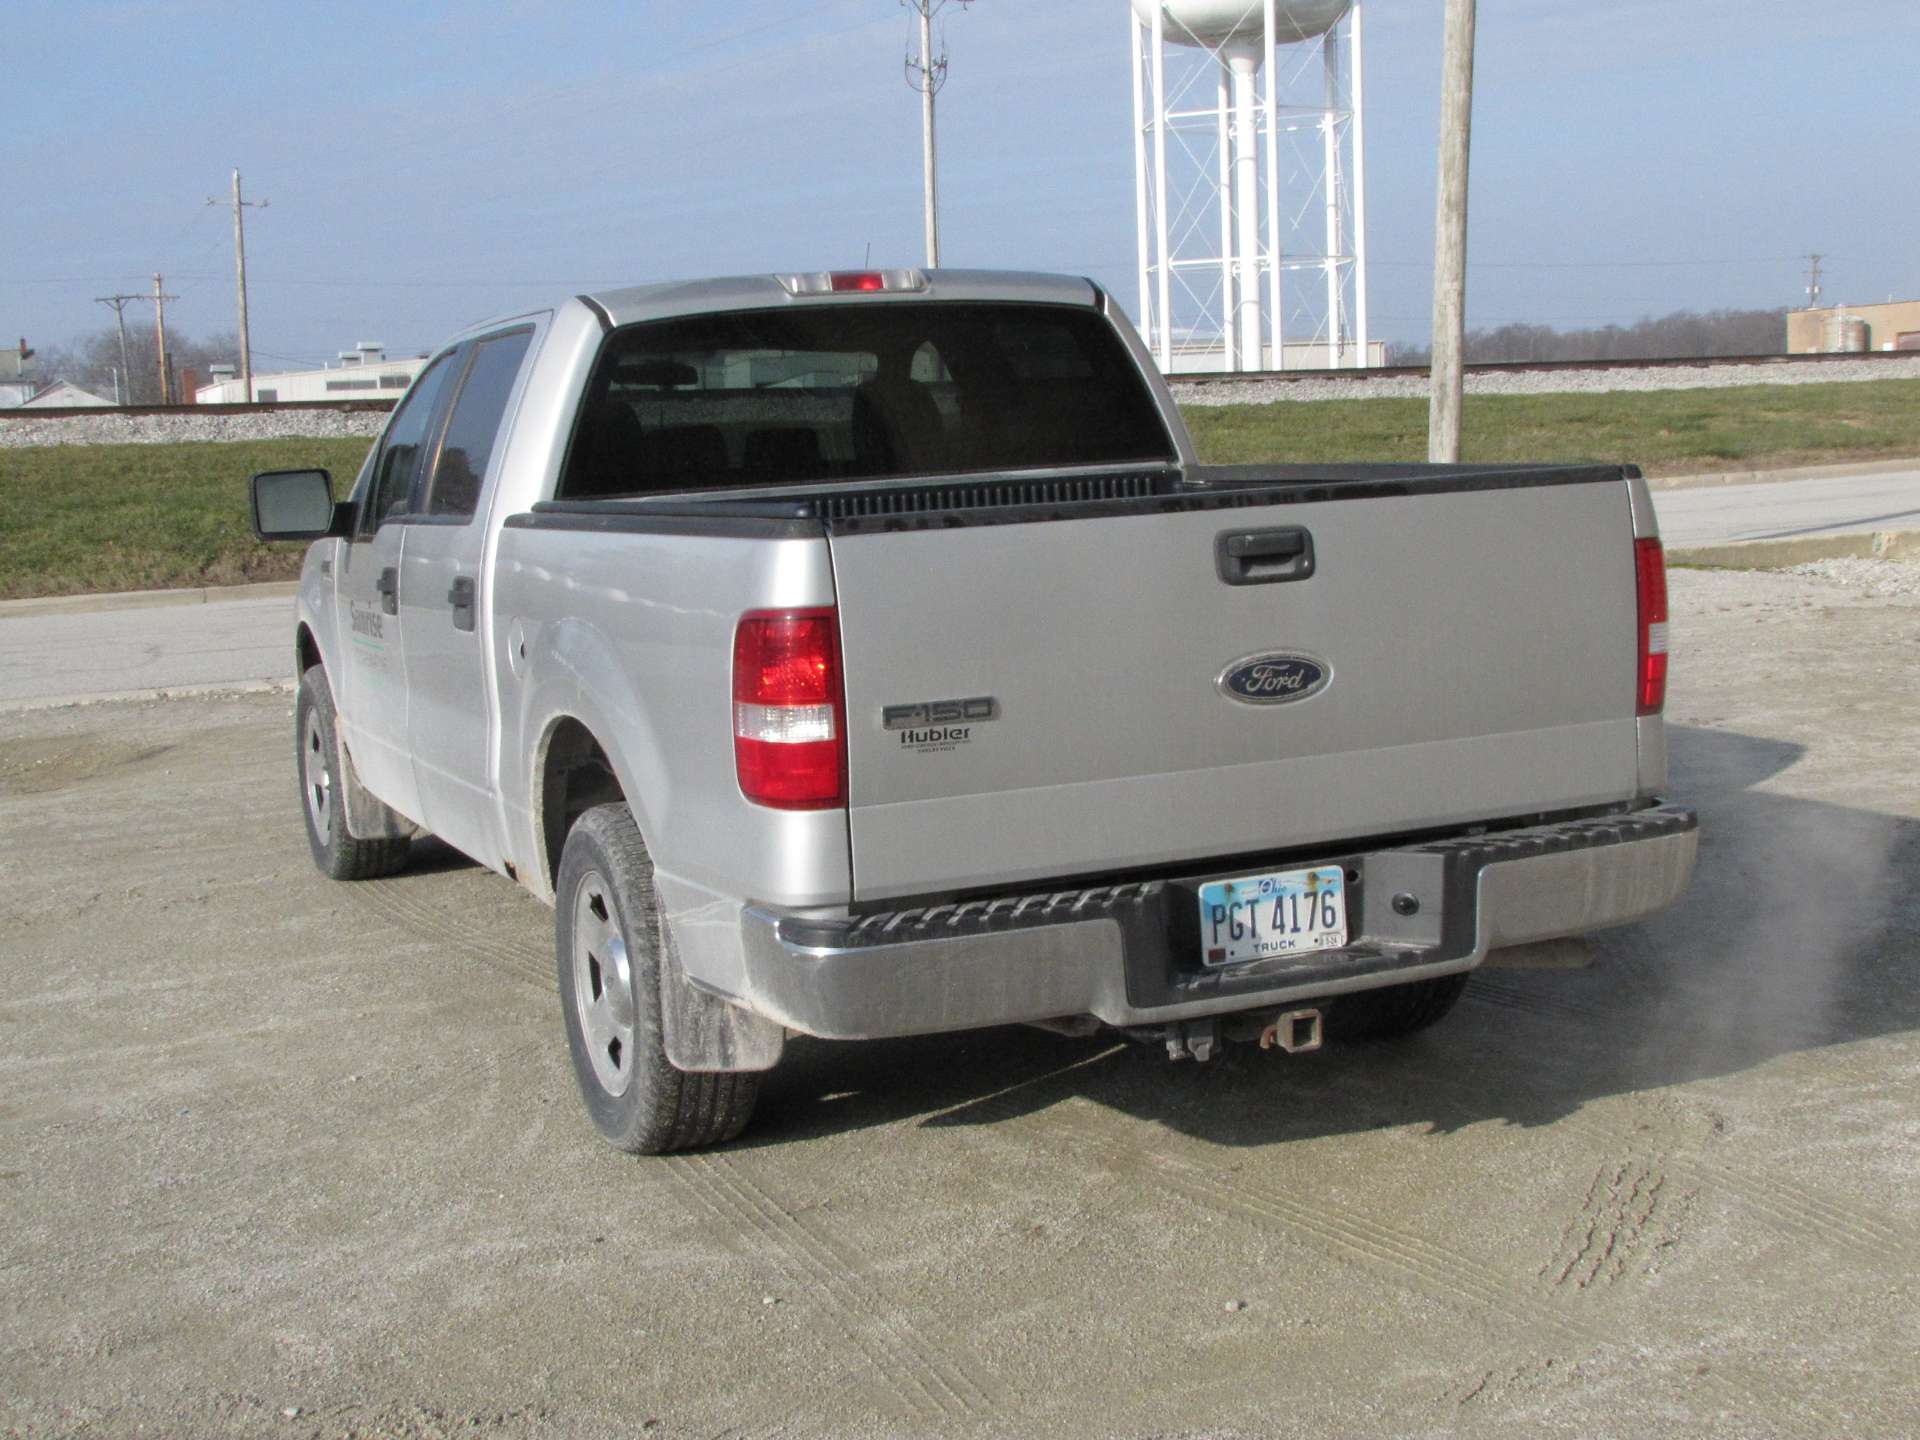 2005 Ford F-150 XLT pickup truck - Image 10 of 89